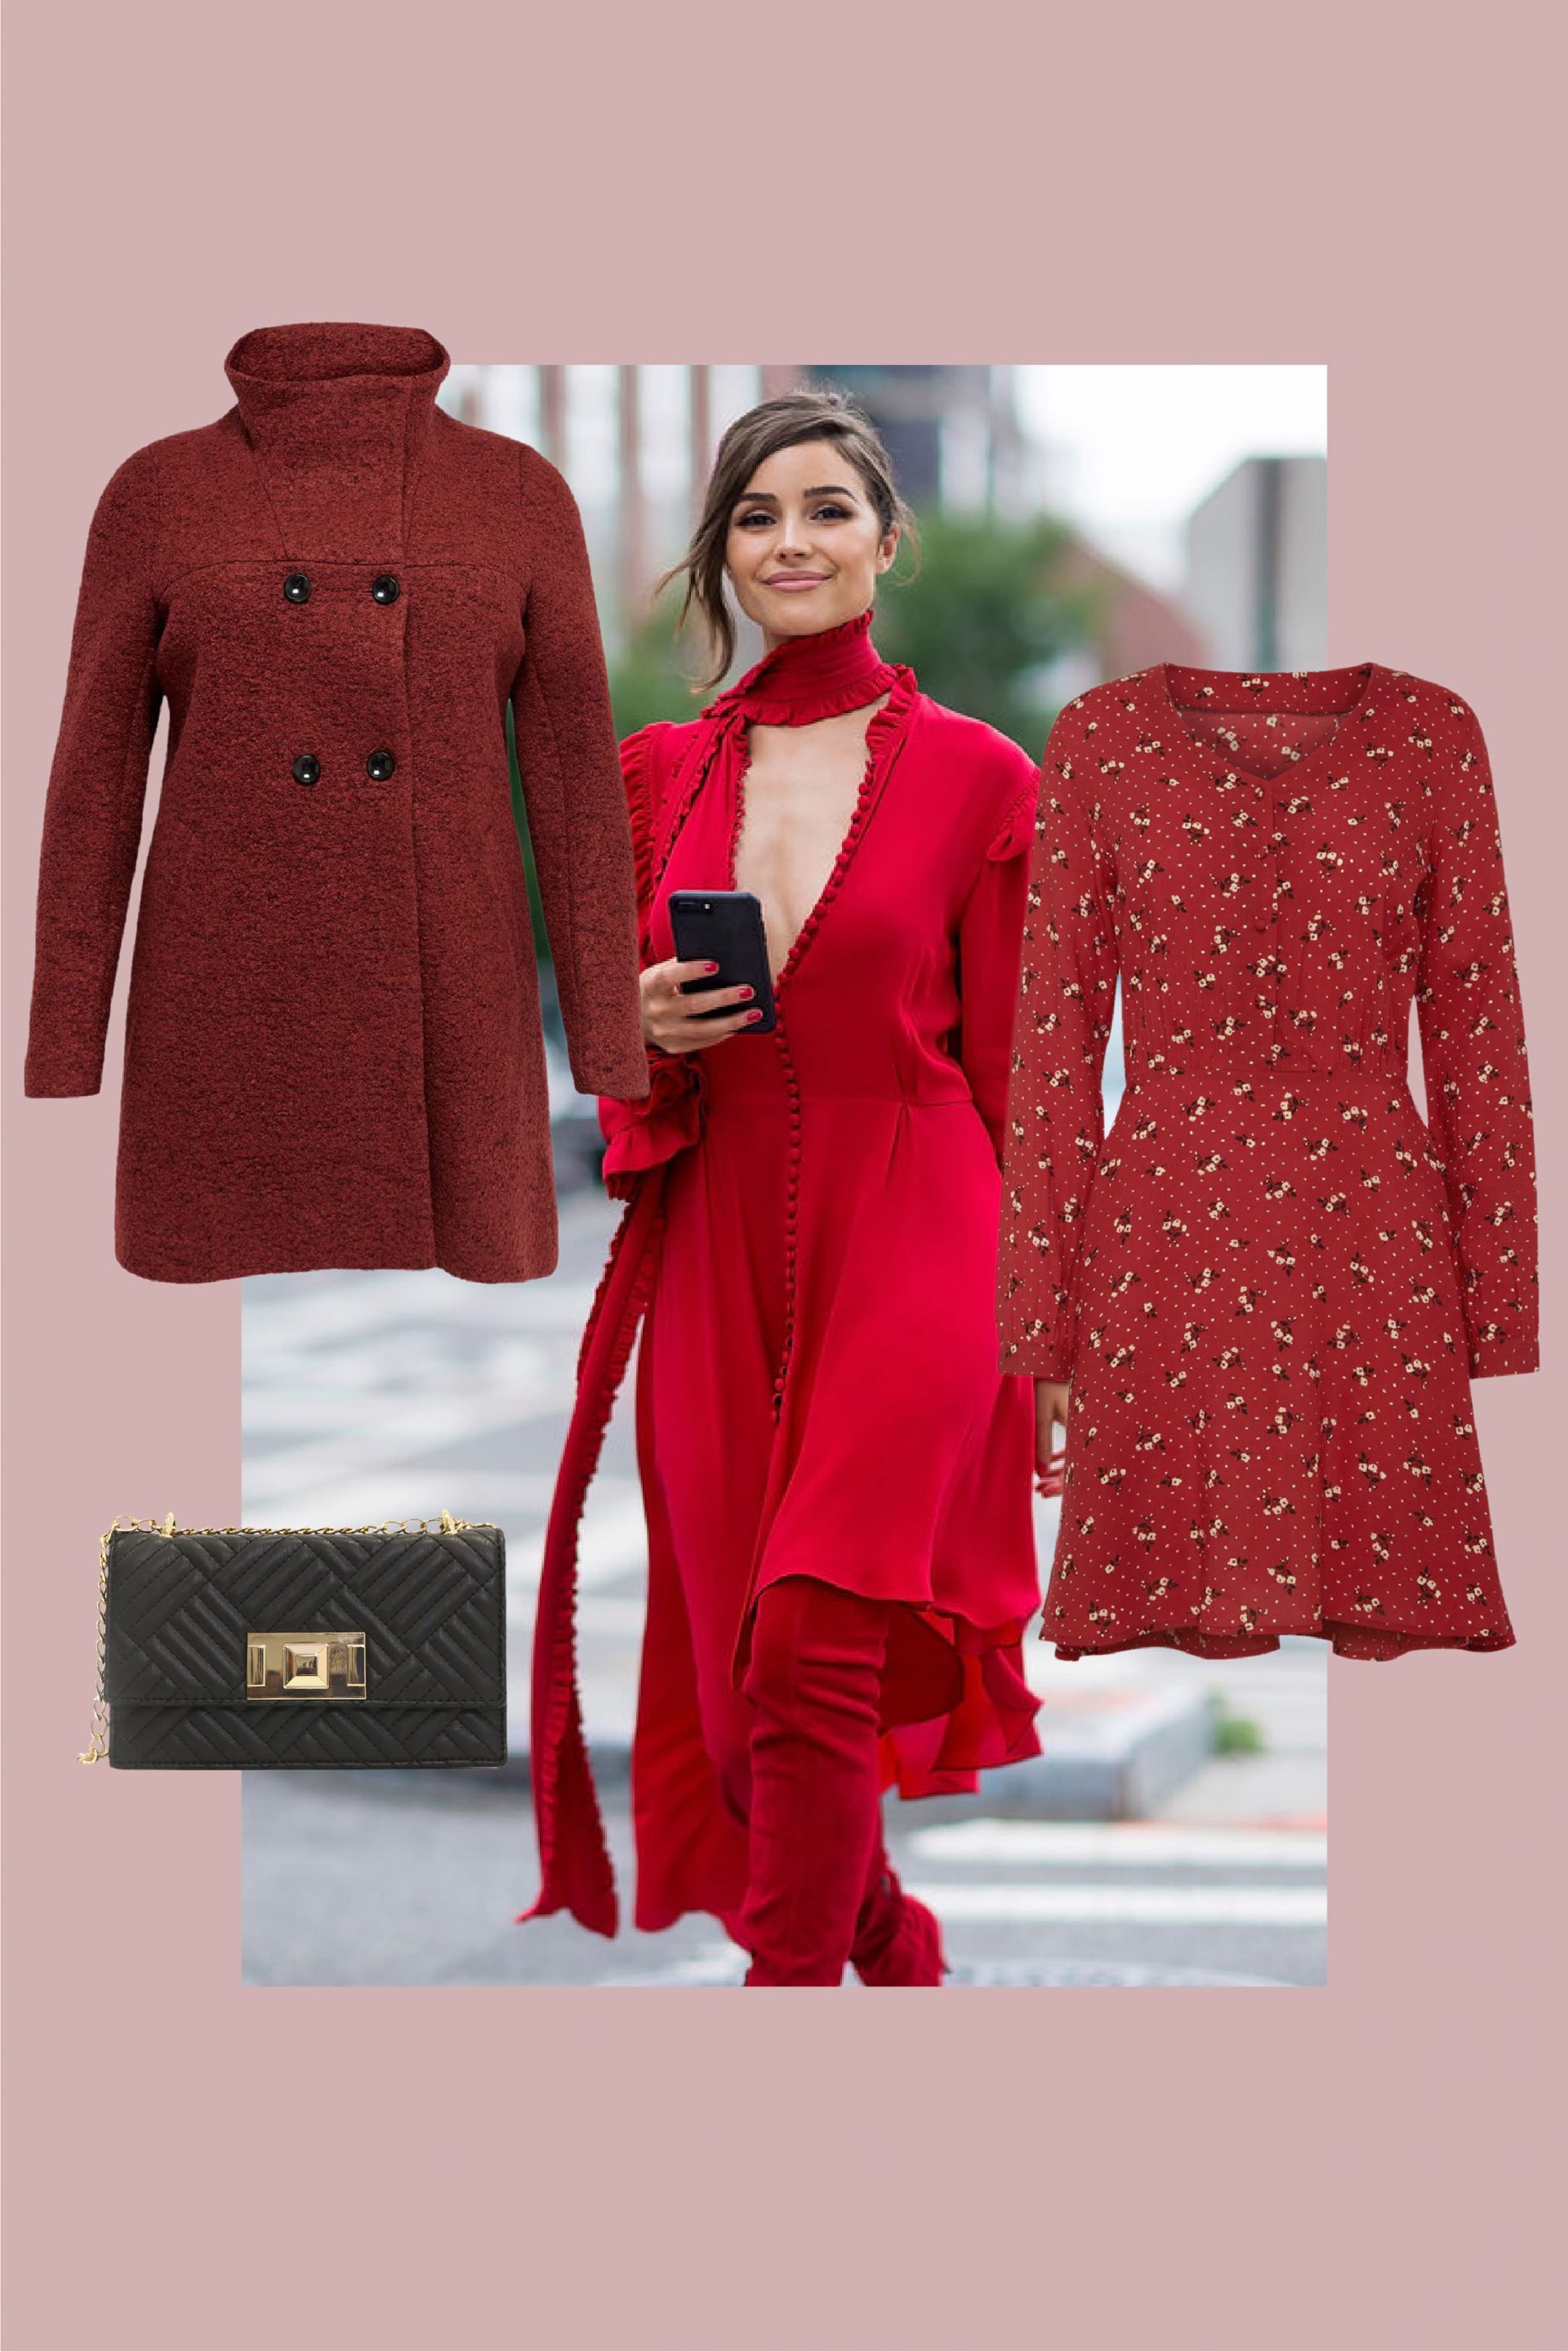 le look total rouge